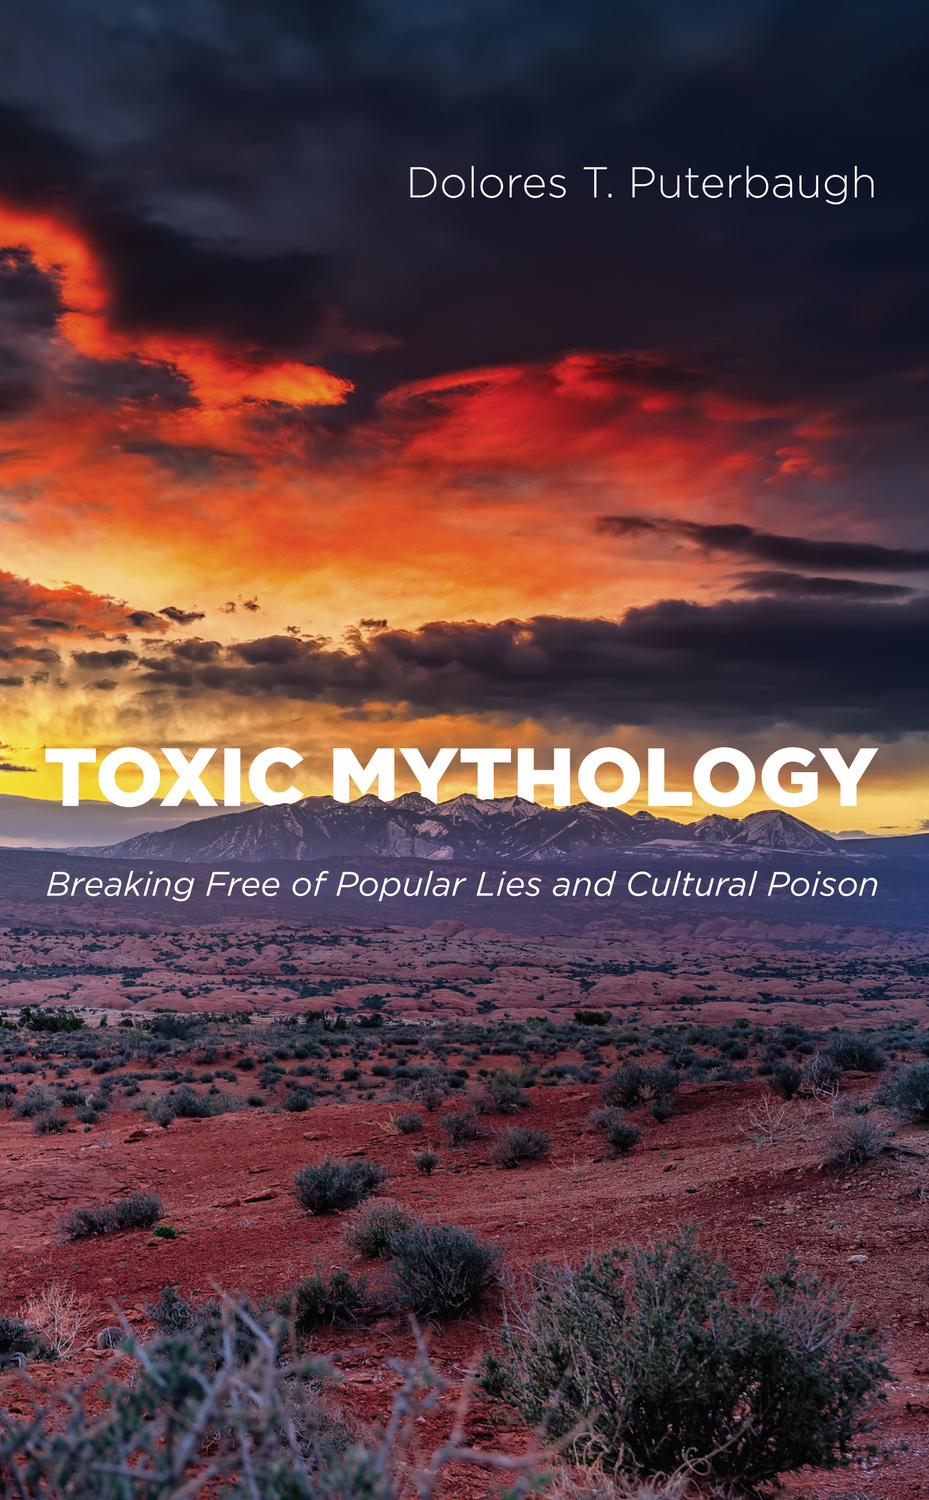 Gallery Photo of Cover of new book, Toxic Mythology, c. 2015